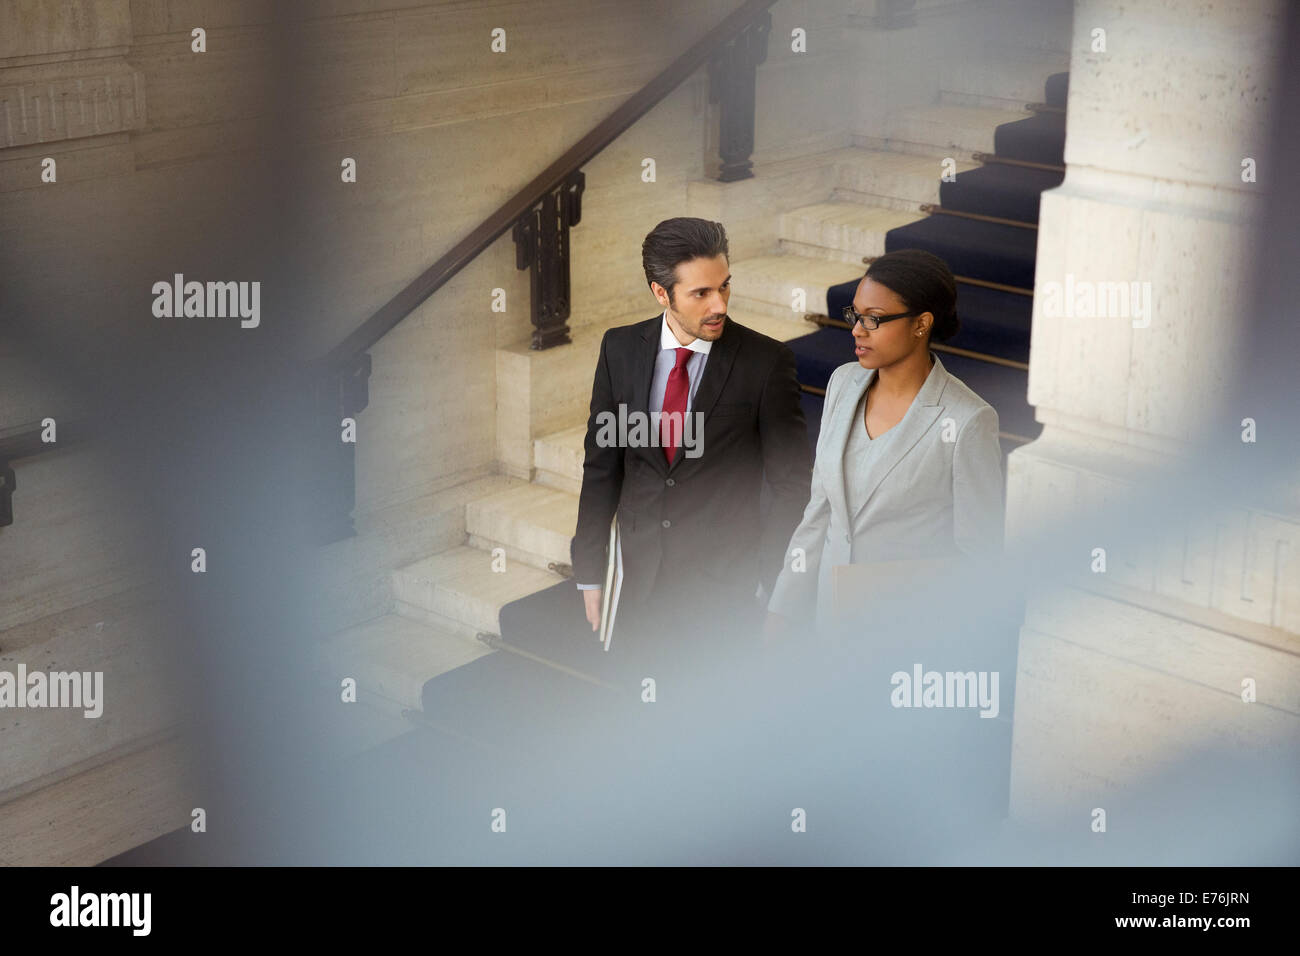 Lawyers walking downstairs in courthouse Stock Photo